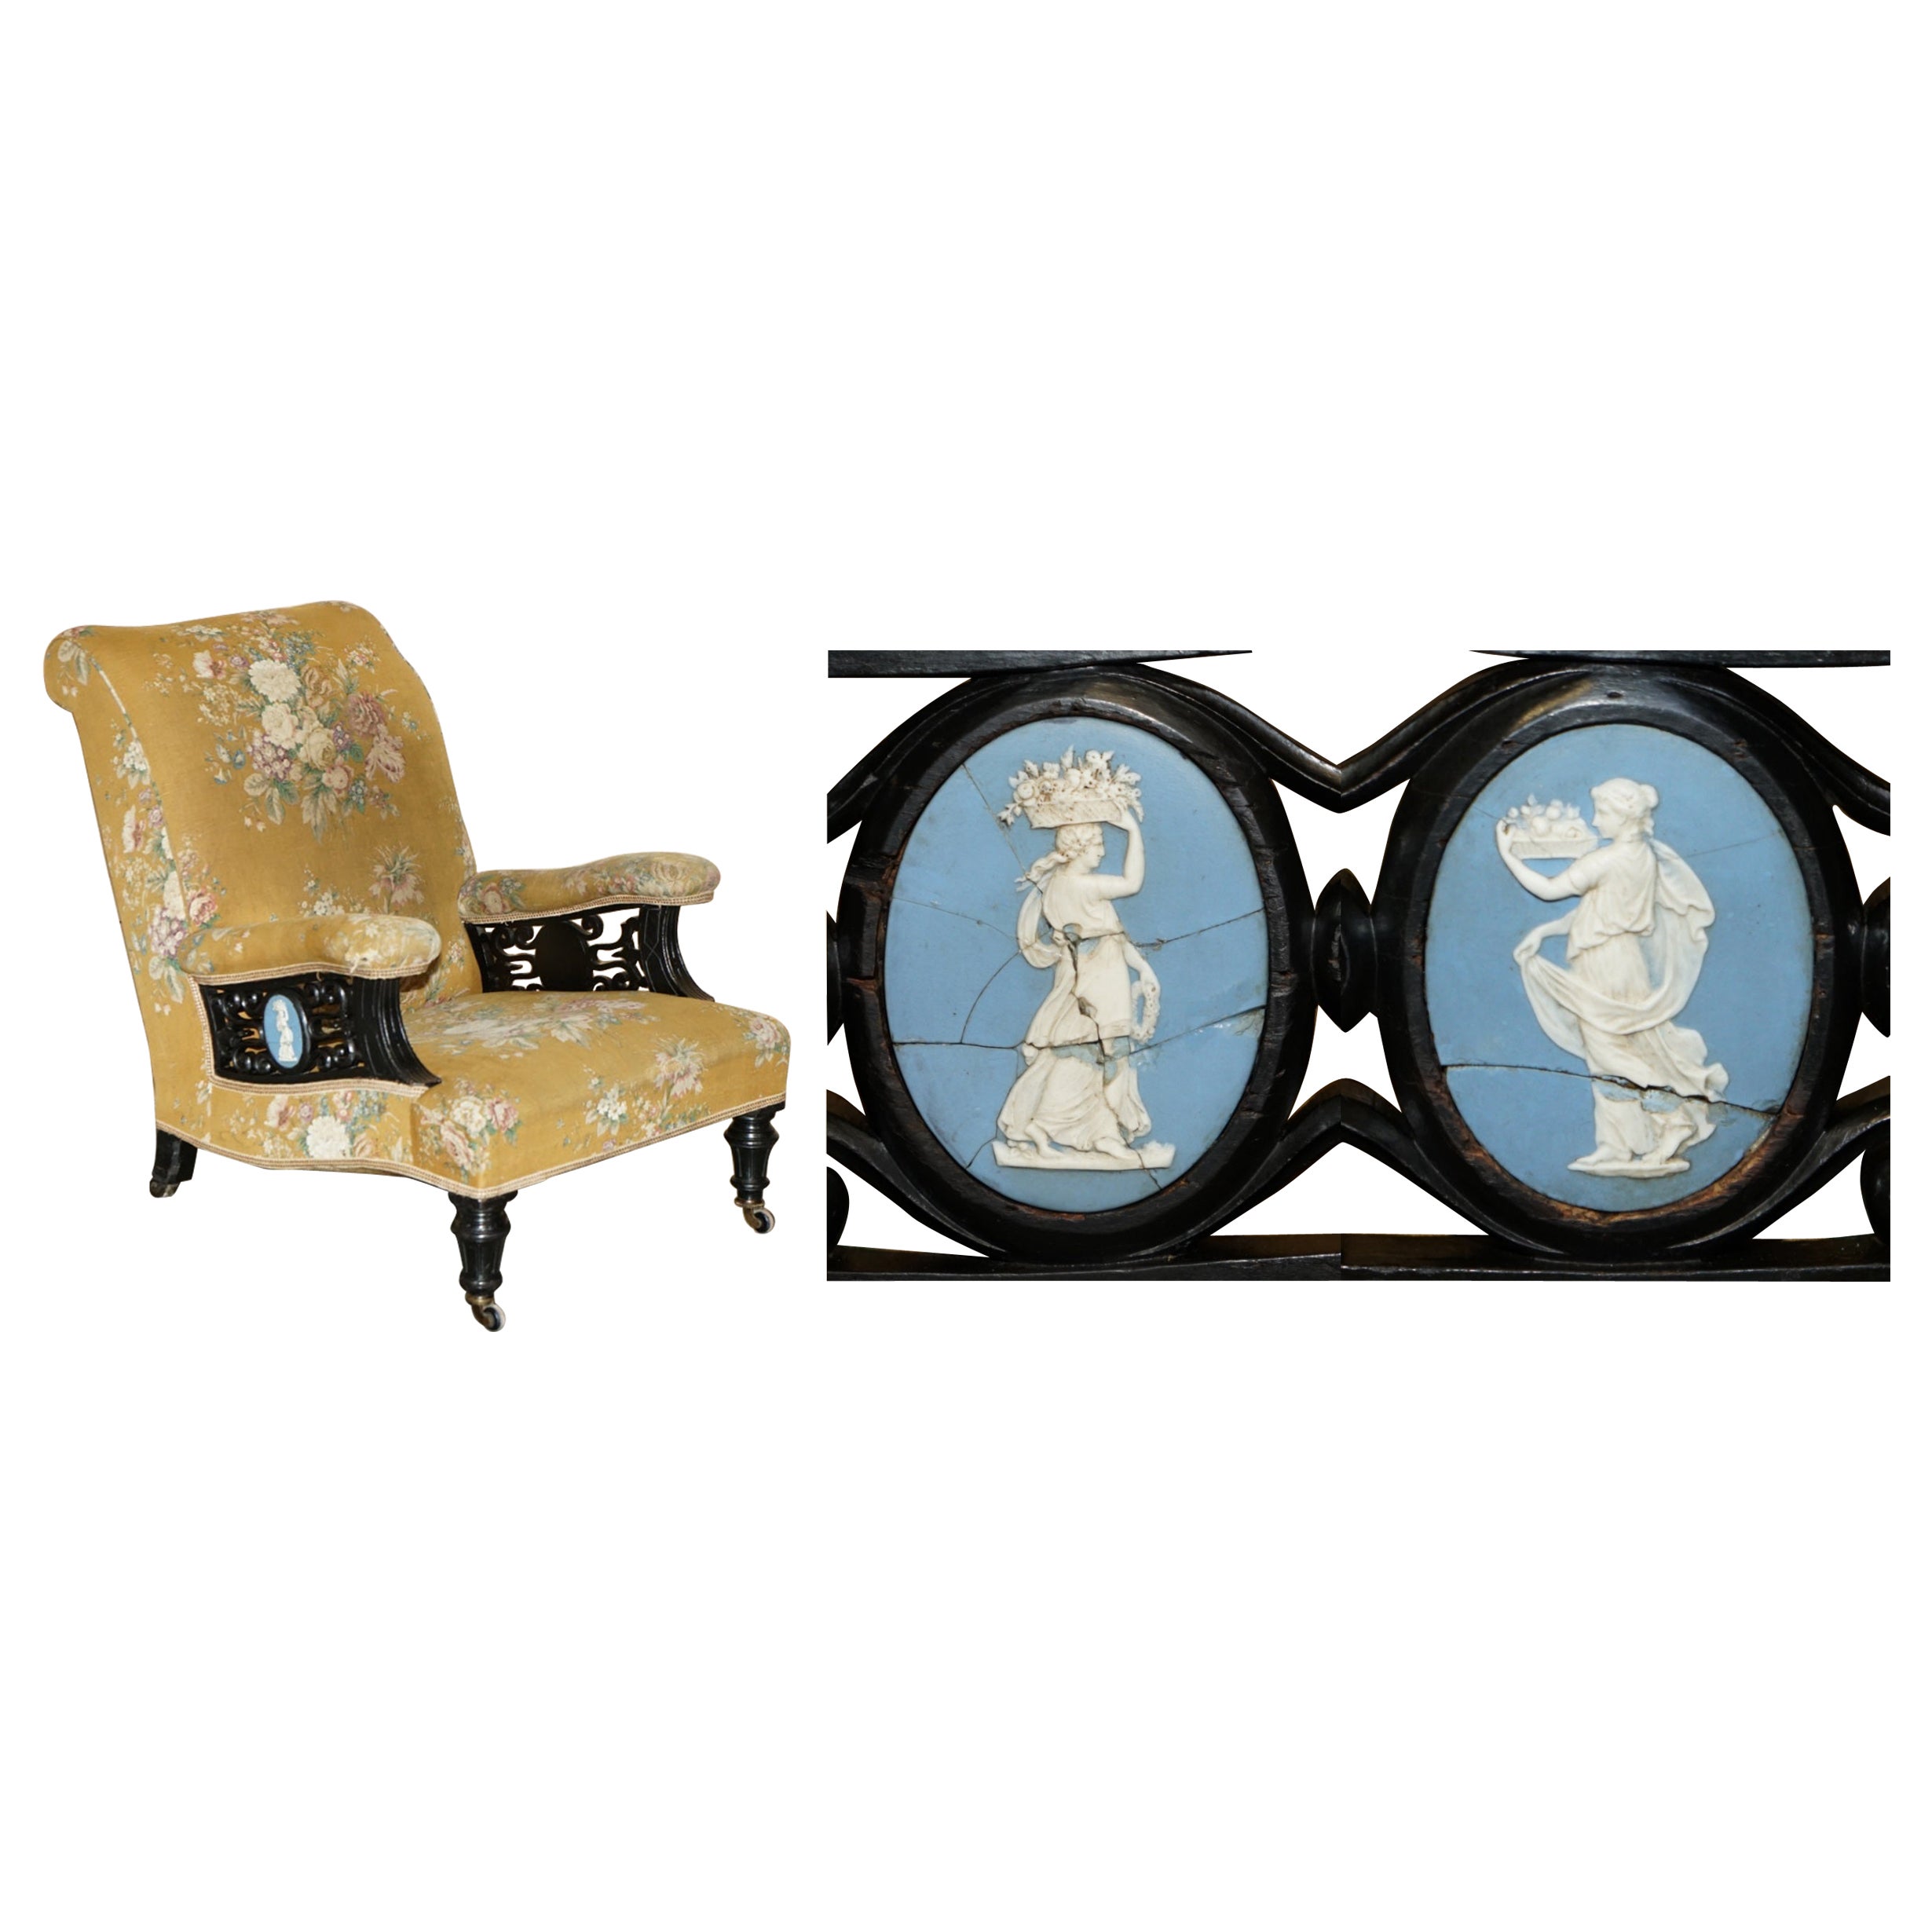 SUPER RARE ANTiQUE VICTORIAN AESTHETIC MOVEMENT ARMCHAIR WITH GRAND TOUR PLAQUES For Sale